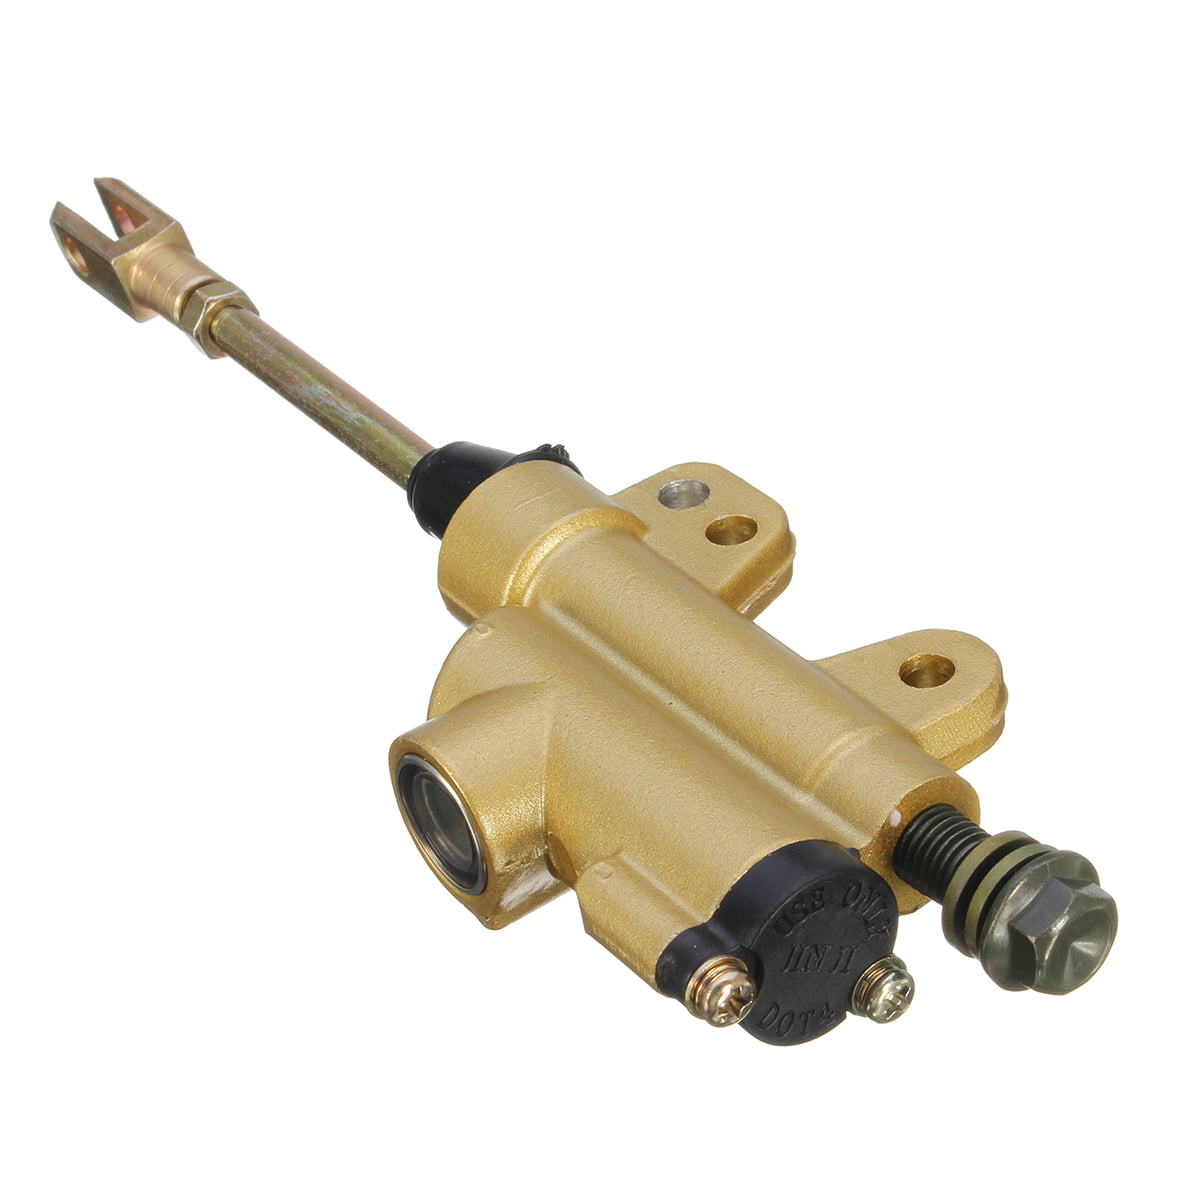 Details about  / 45mm Motorcycle Rear Foot Brake Hydraulic Master Cylinder Pump For Dirt Bike